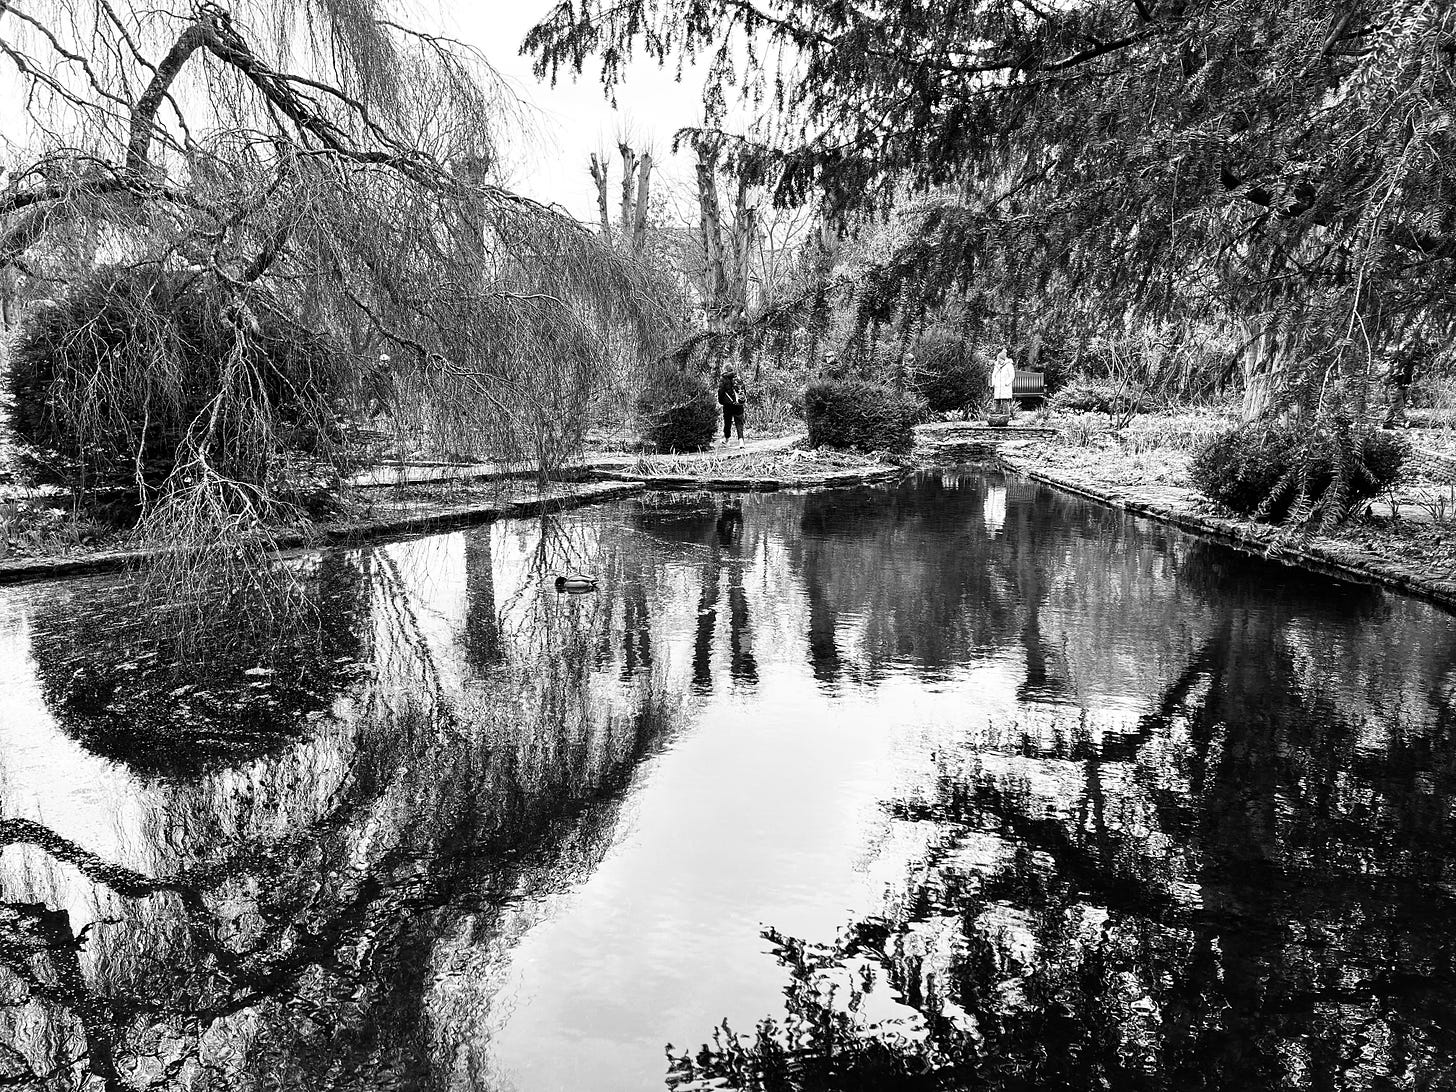 A black and white photo of the pond at The Courts, Holt, Wiltshire. The trees are reflected in the water.